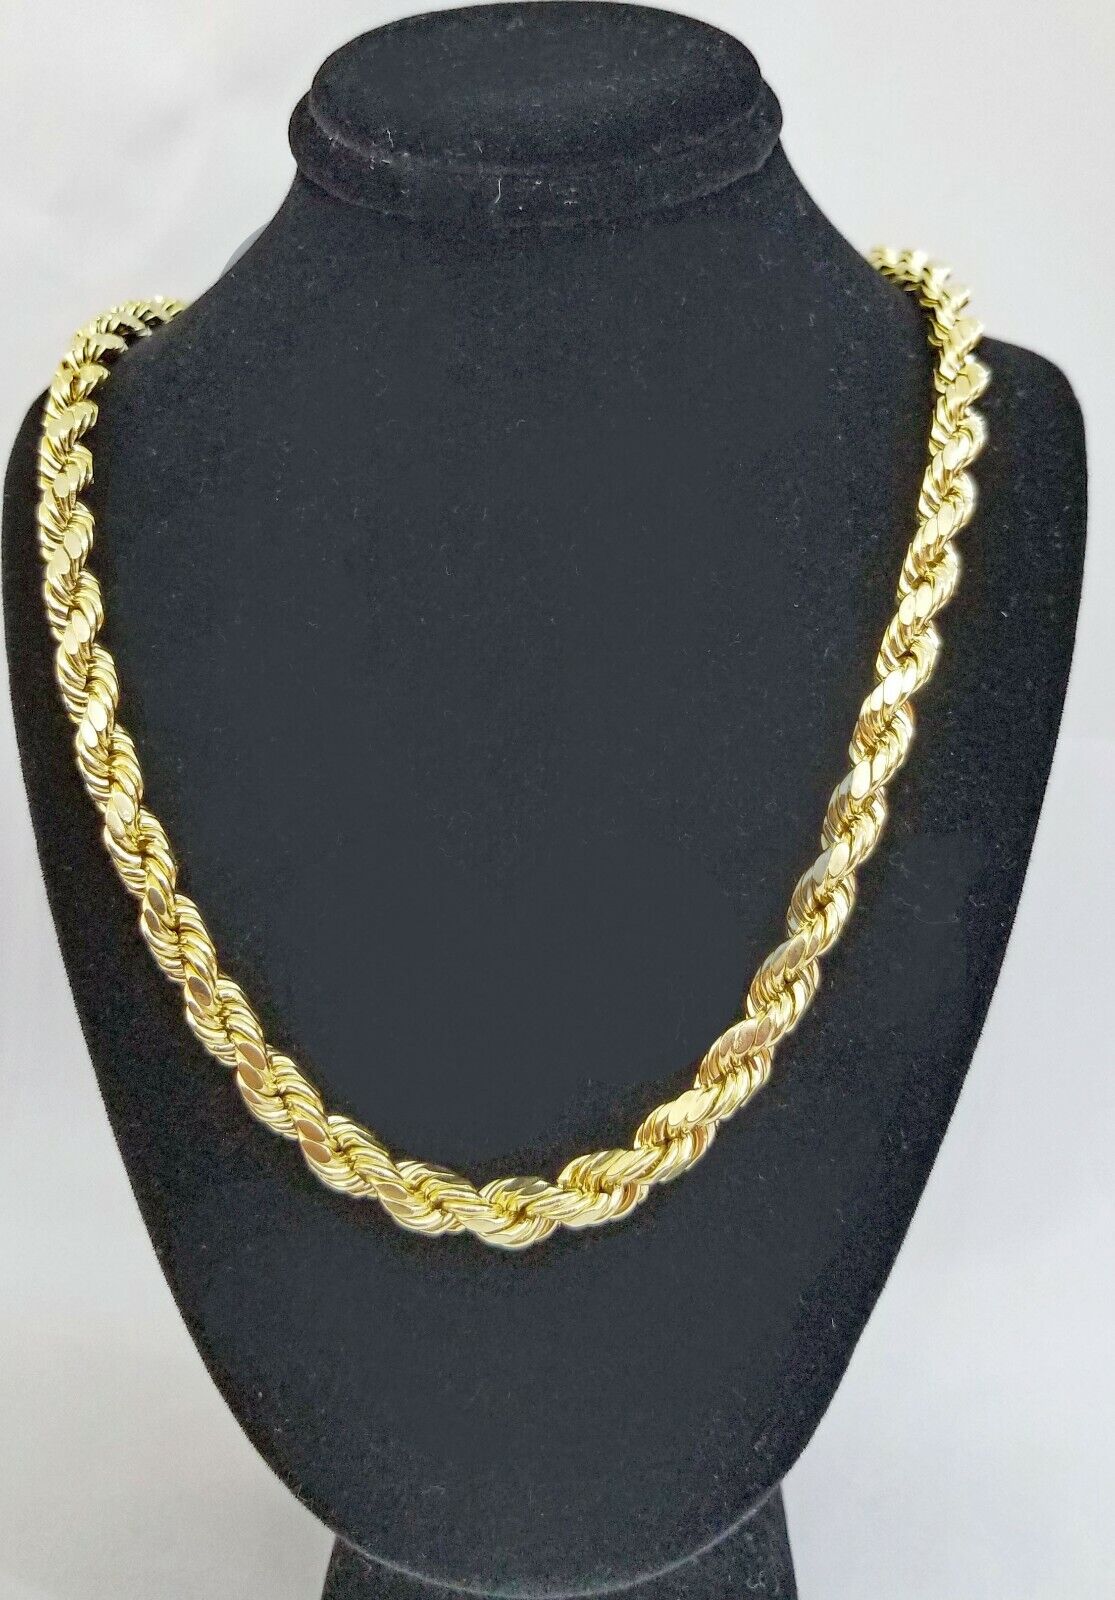 REAL 10K Gold Rope Chain 7mm 26 Inch Men Necklace Gold Diamond Cut